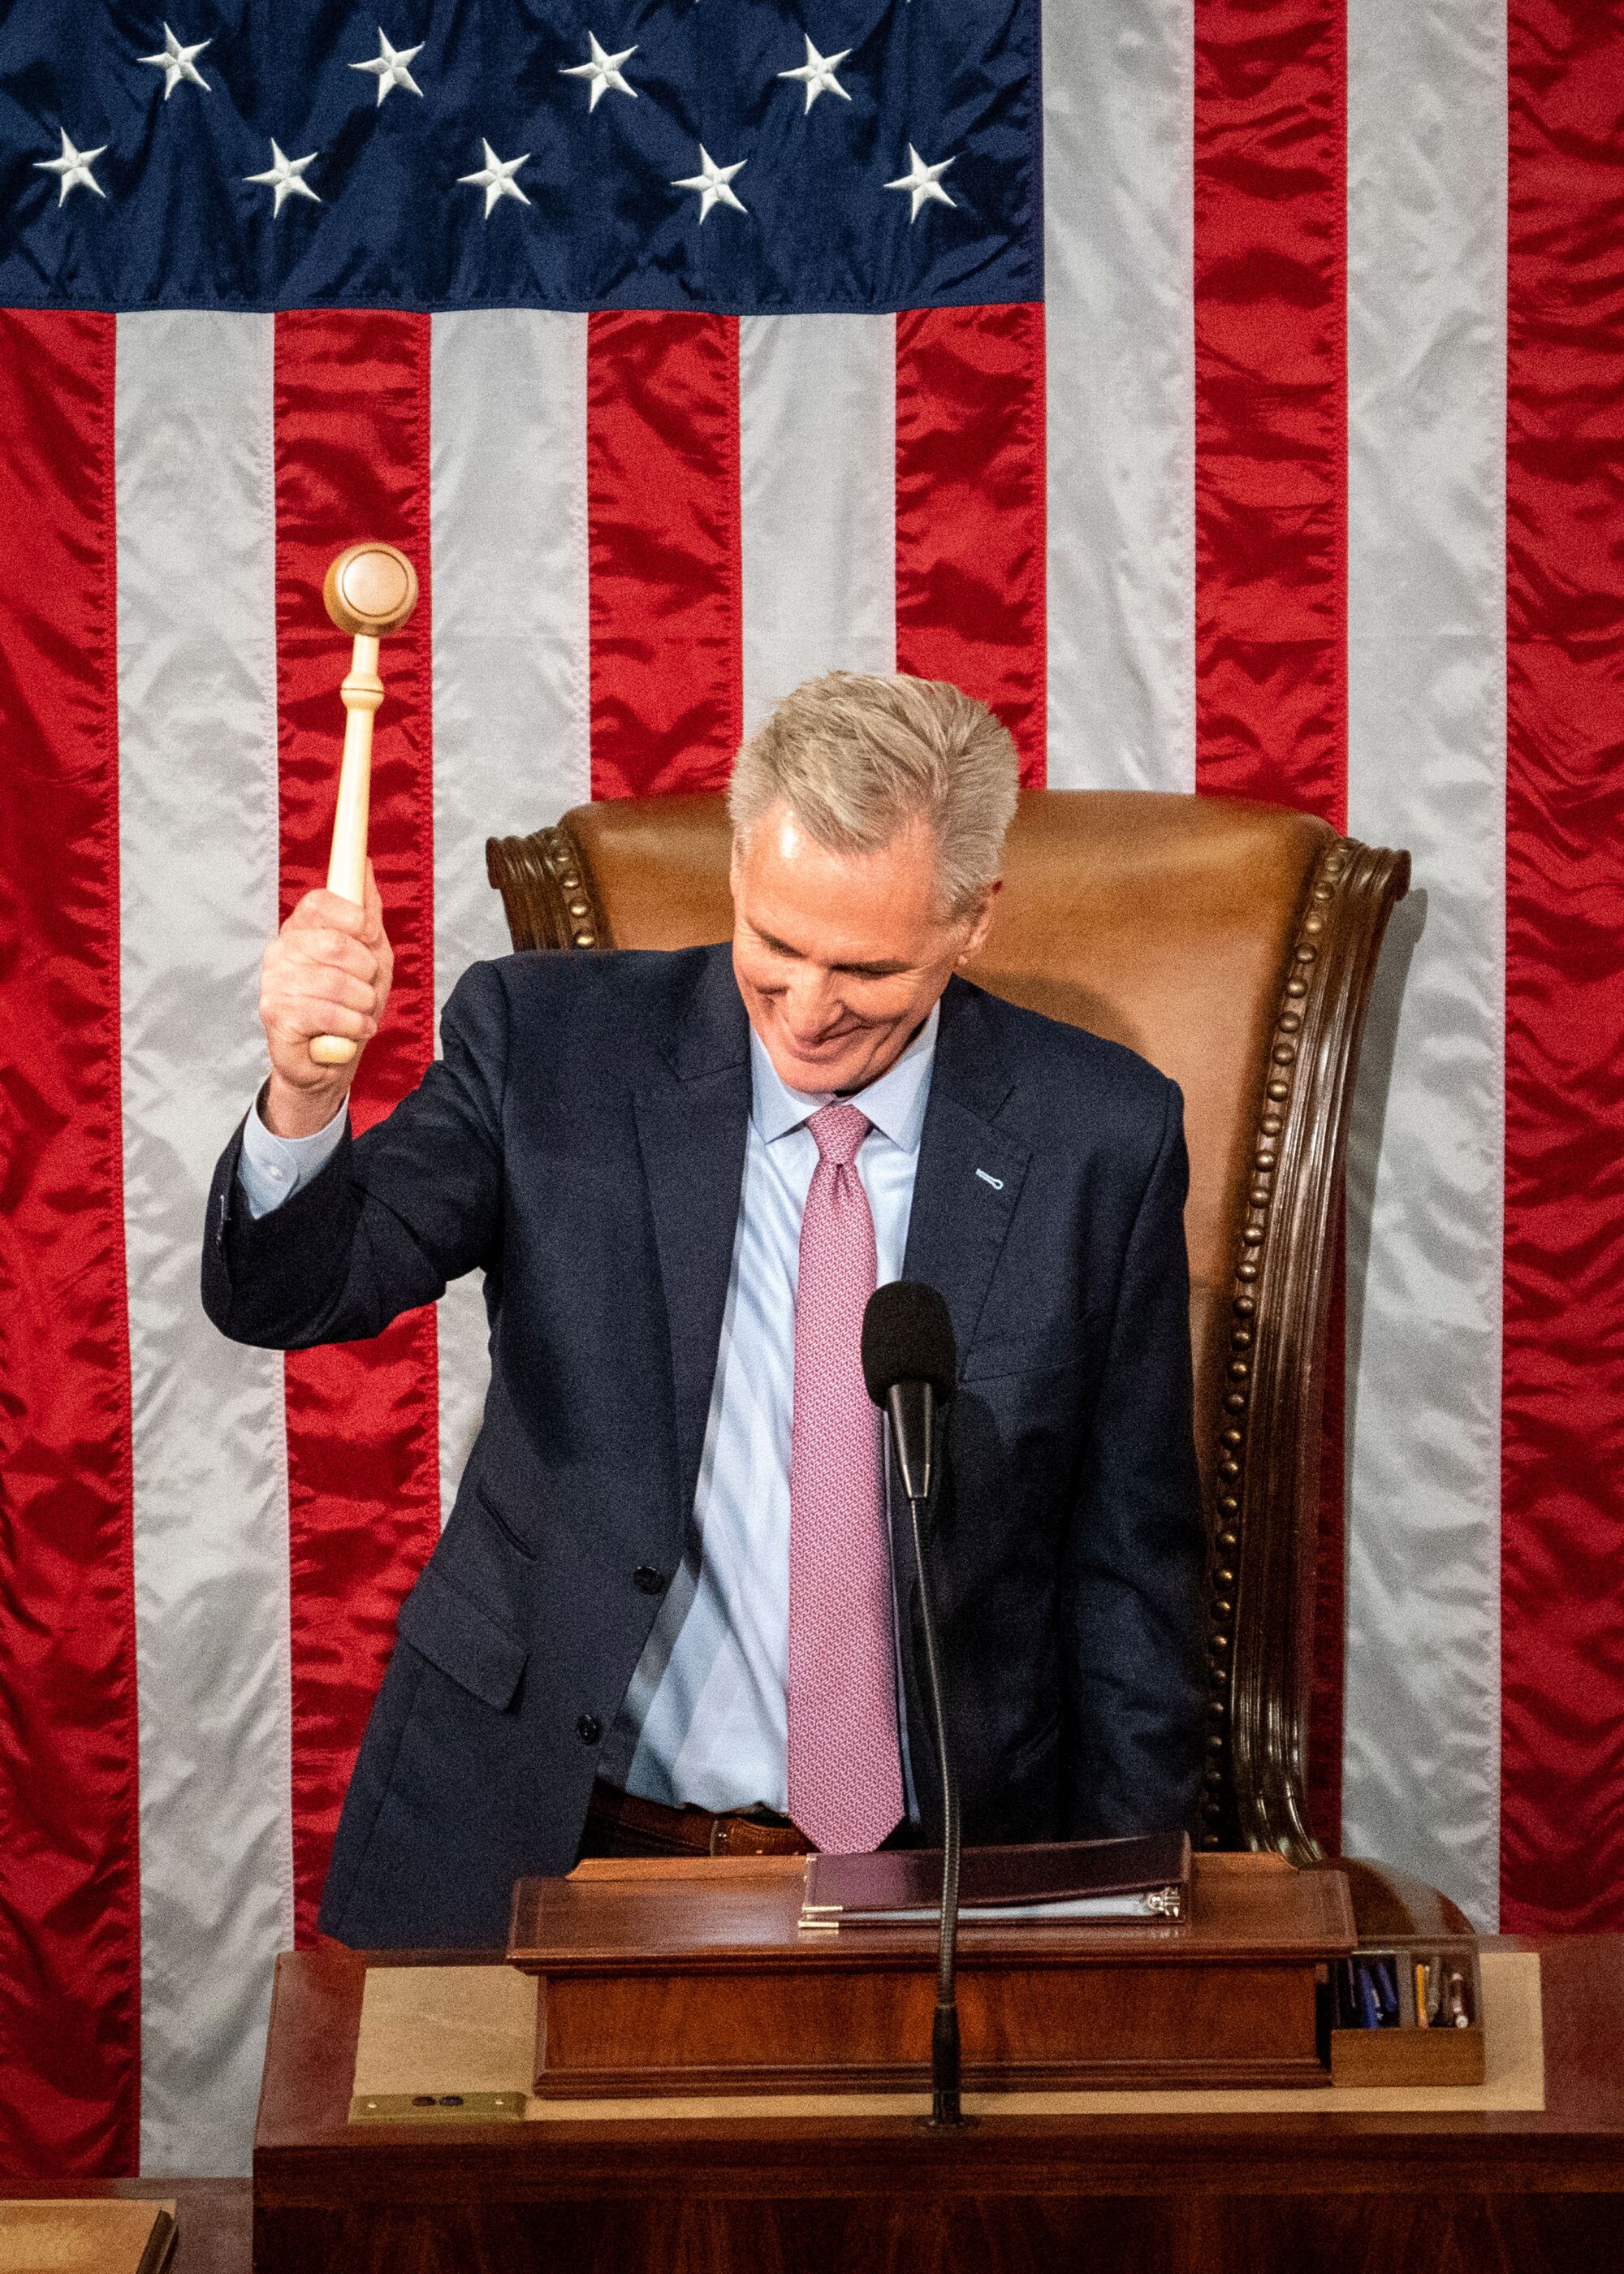 A man knocks down a gavel in front of the American flag.